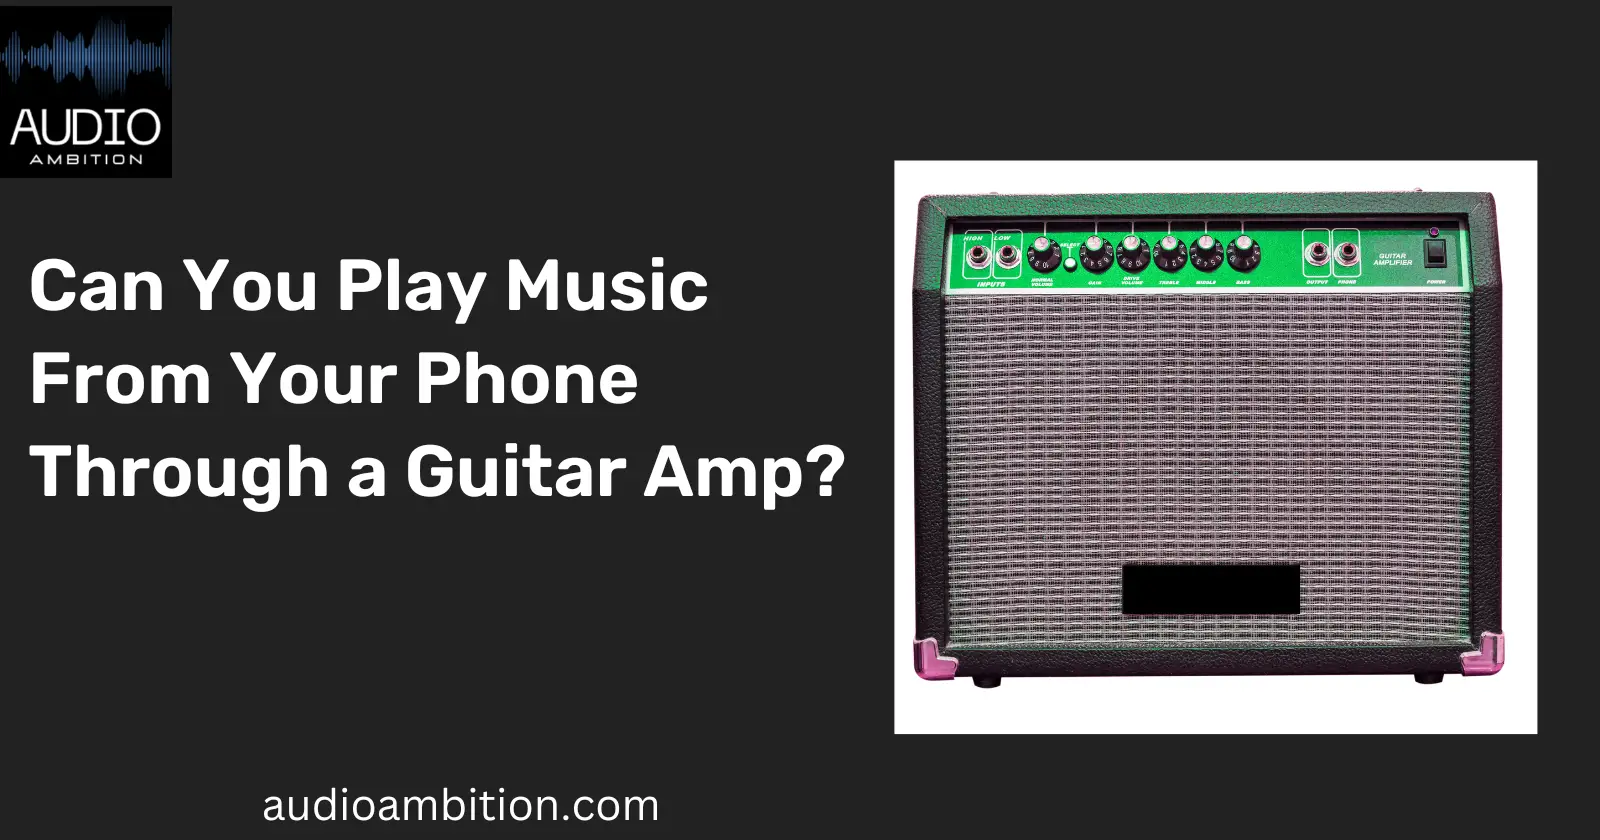 Can You Play Music From Your Phone Through a Guitar Amp